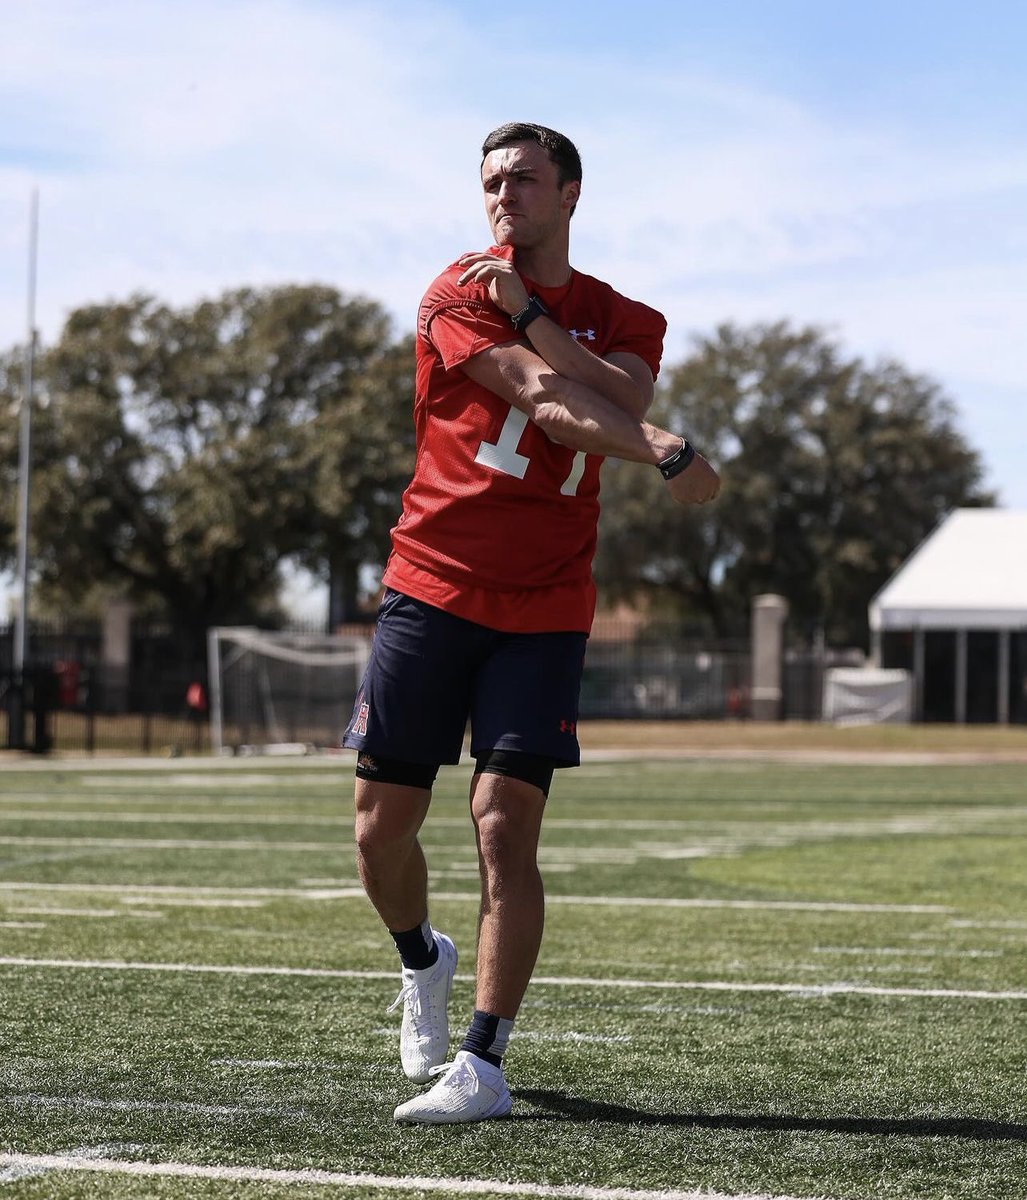 #UFL Training Camp:

Picture of QB Nolan Henderson of the @XFLRoughnecks at training camp getting prepared for some drills. 32 days till the start of the season. 

#AFN 
@NolanMHenderson